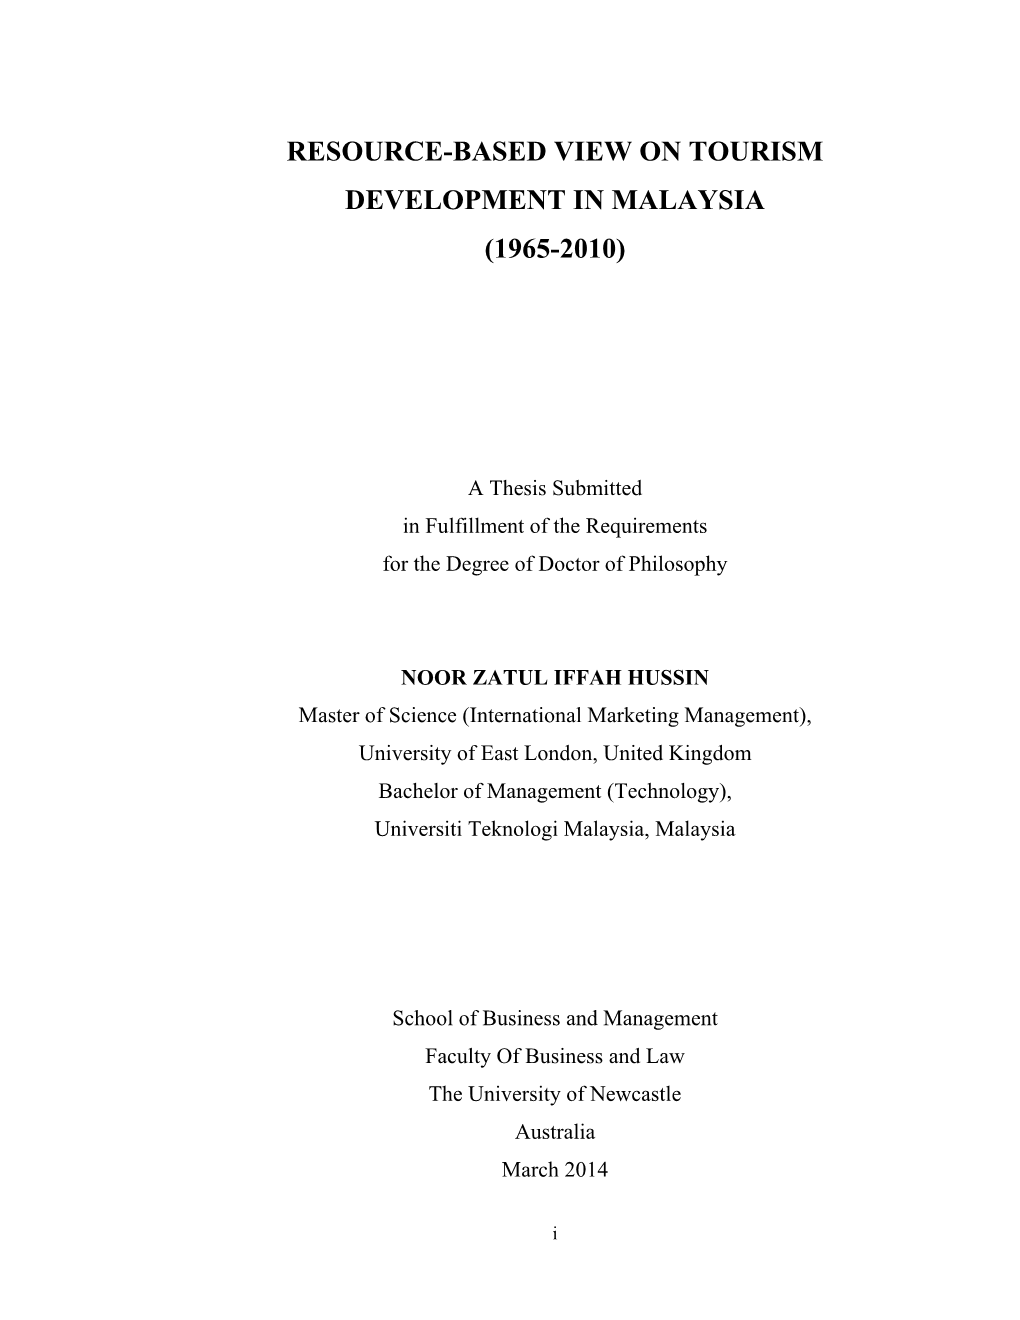 Resource-Based View on Tourism Development in Malaysia (1965-2010)